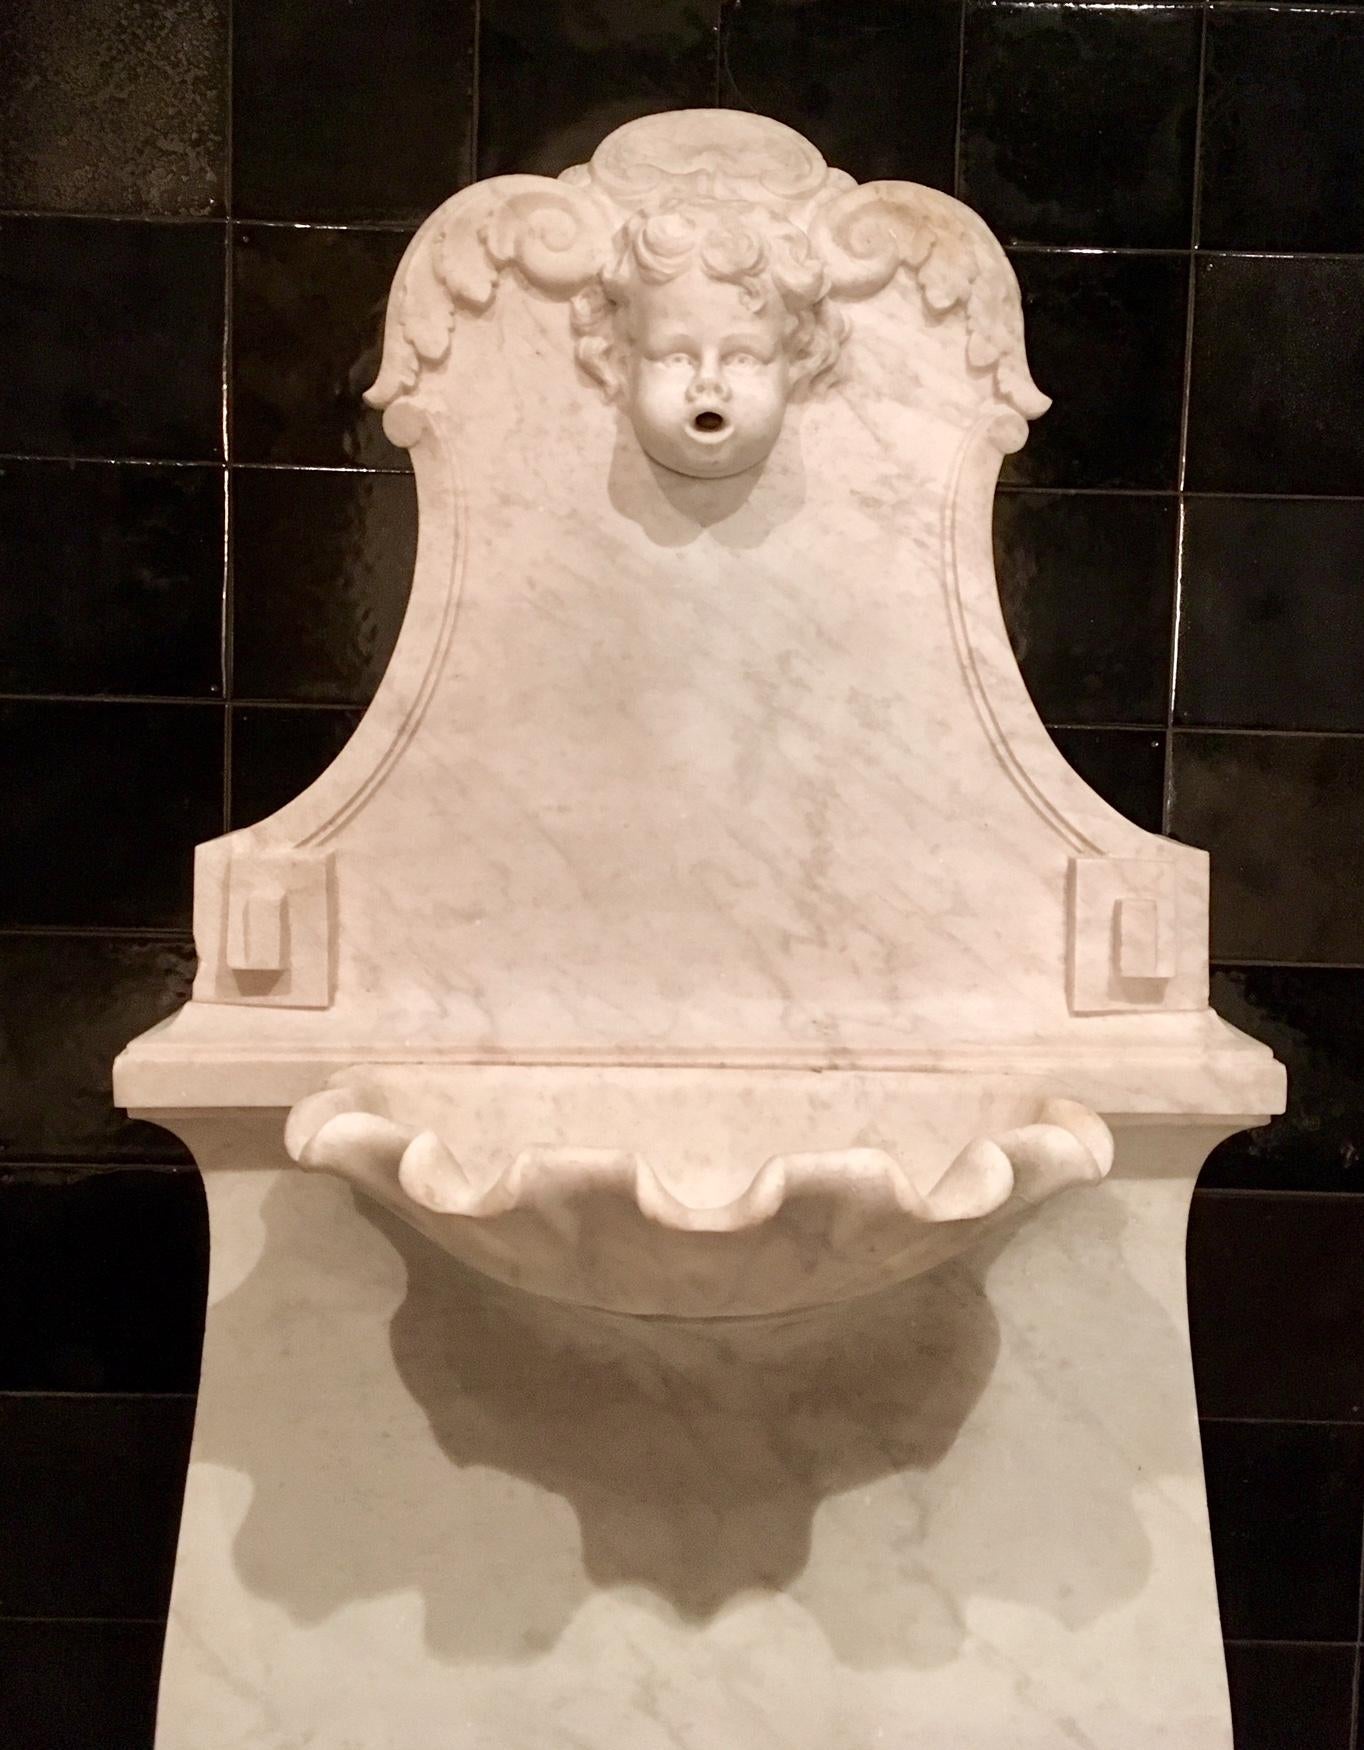 Hand-Carved Decorative Antique Sculpted Marble Wall Fountain or Basin